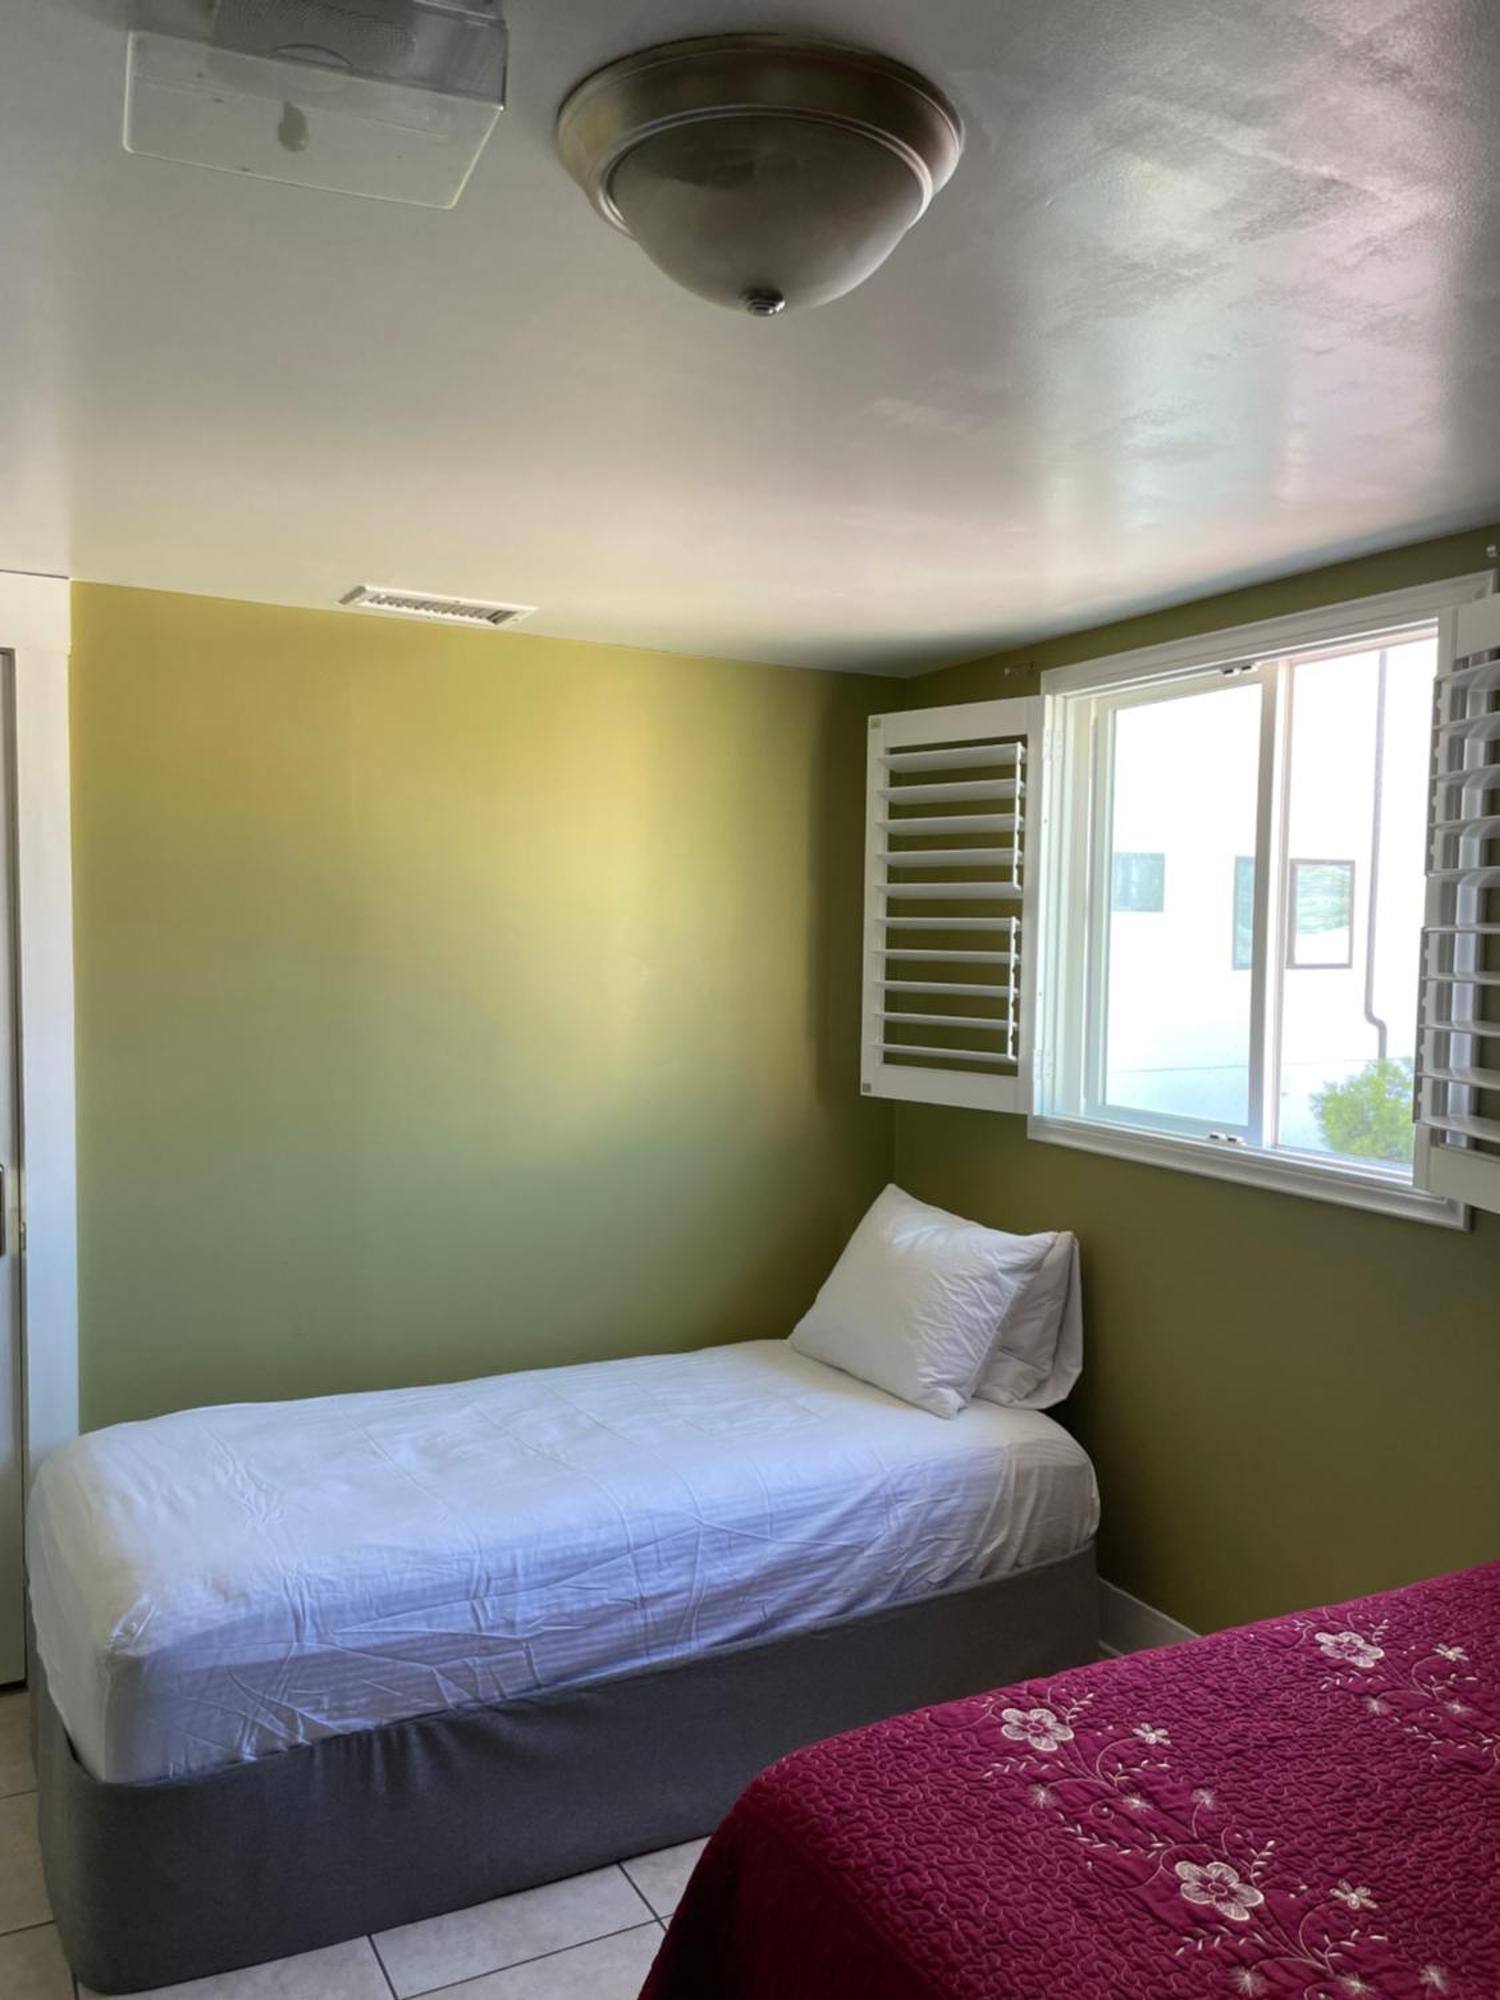 Spacious Private Los Angeles Bedroom With Ac & Wifi & Private Fridge Near Usc The Coliseum Exposition Park Bmo Stadium University Of Southern California 外观 照片